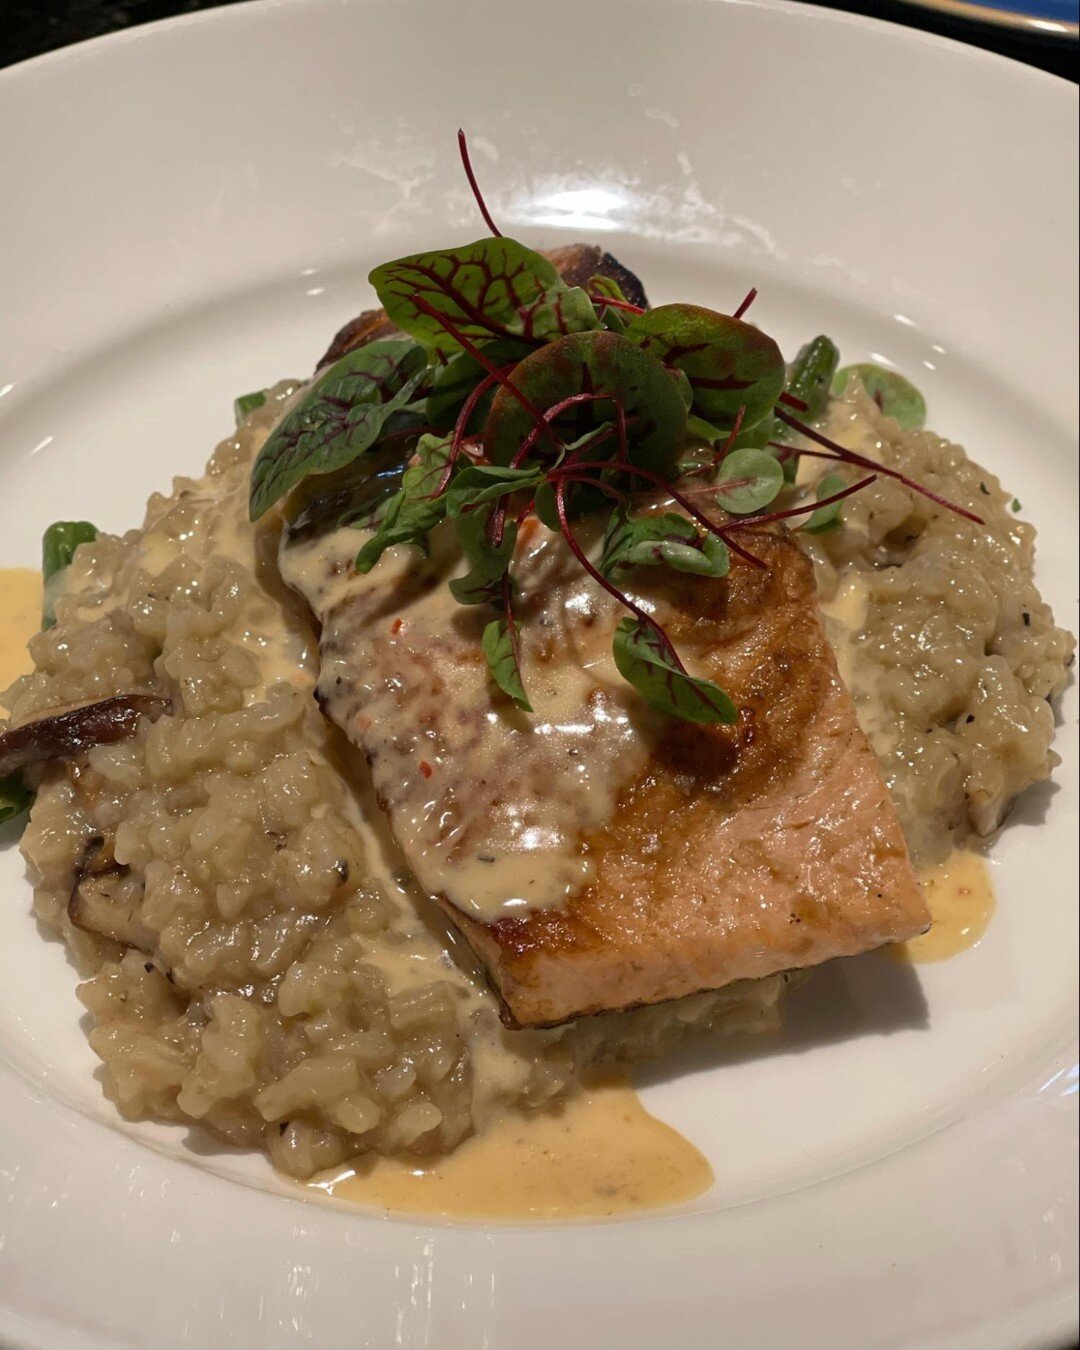 Leading up to #lent, indulge in our seafood options such as our Seared Verlasso Salmon with Shitake-Green Bean Risotto and a drizzle of our Red Pepper Buerre Blanc.